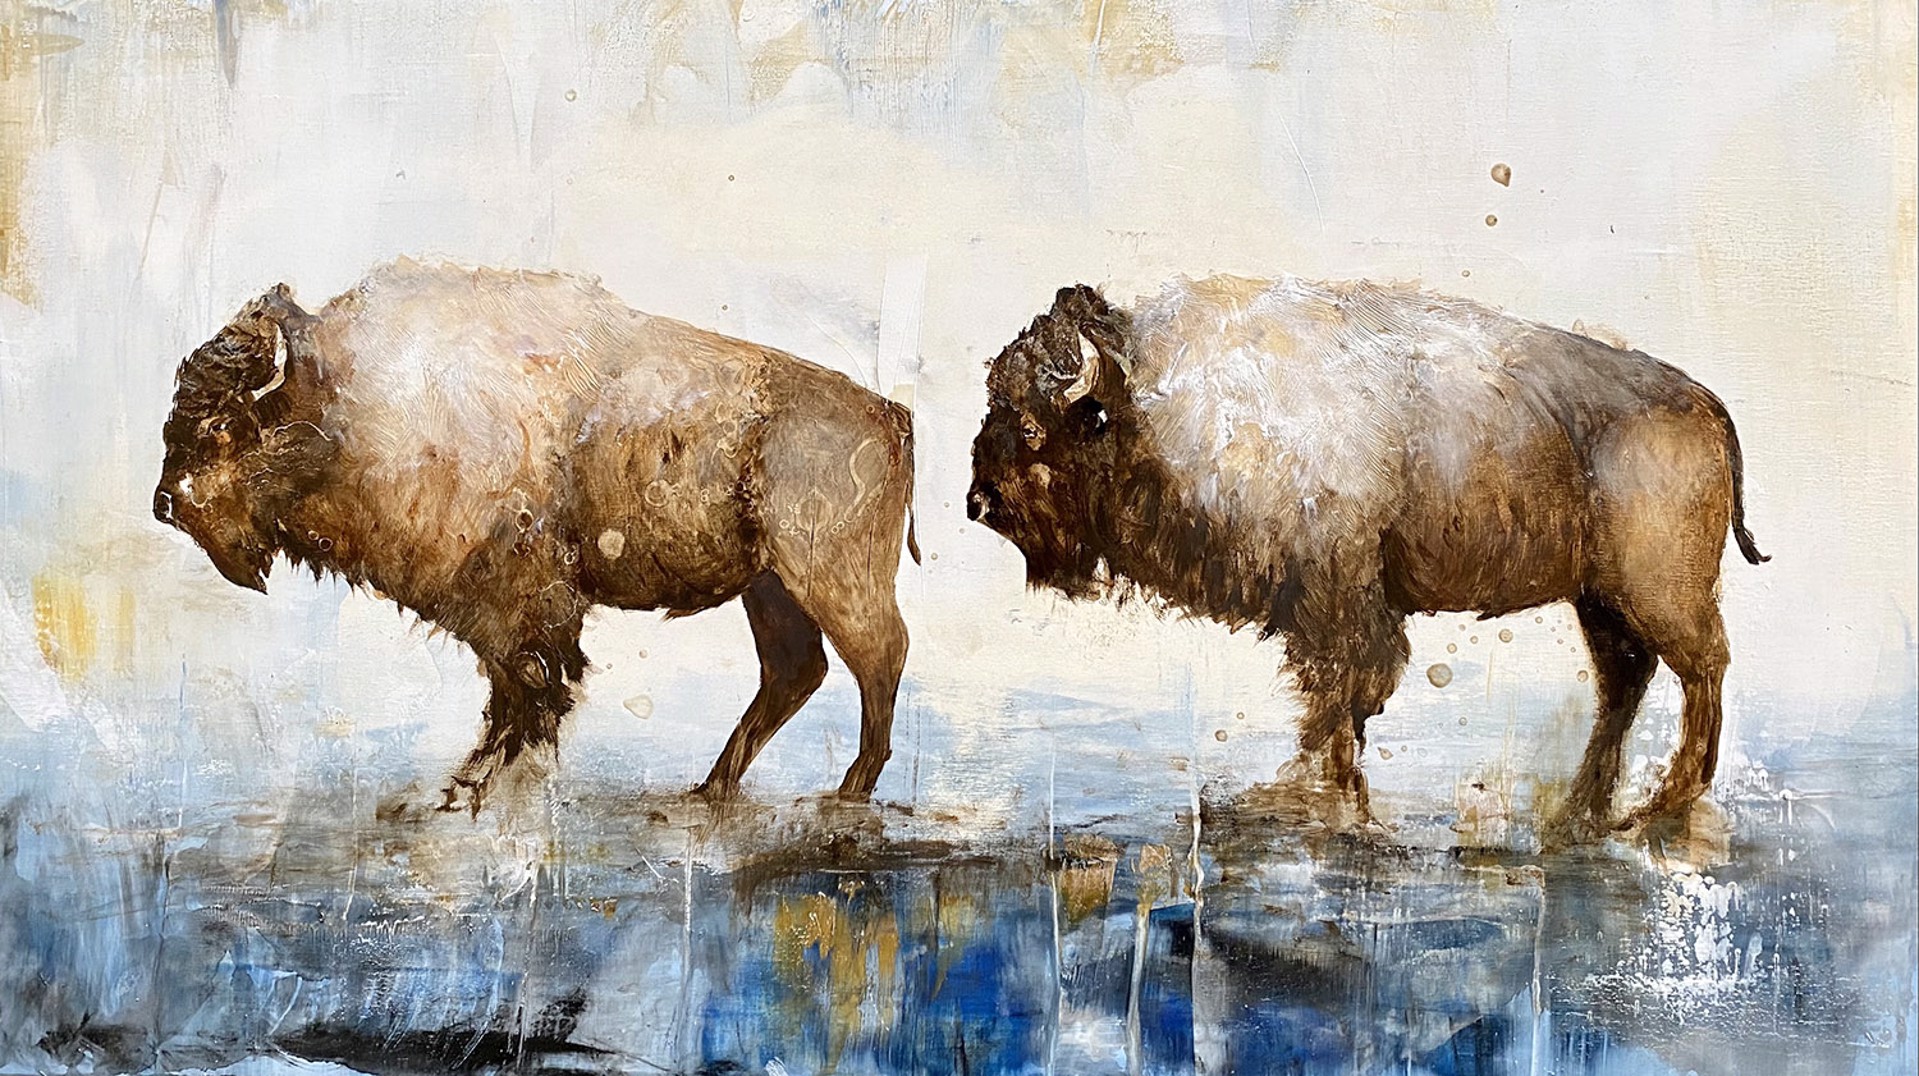 A Contemporary Painting Of Two Bison On A Blue And White Abstract Background By Jenna Von Benedikt At Gallery Wild